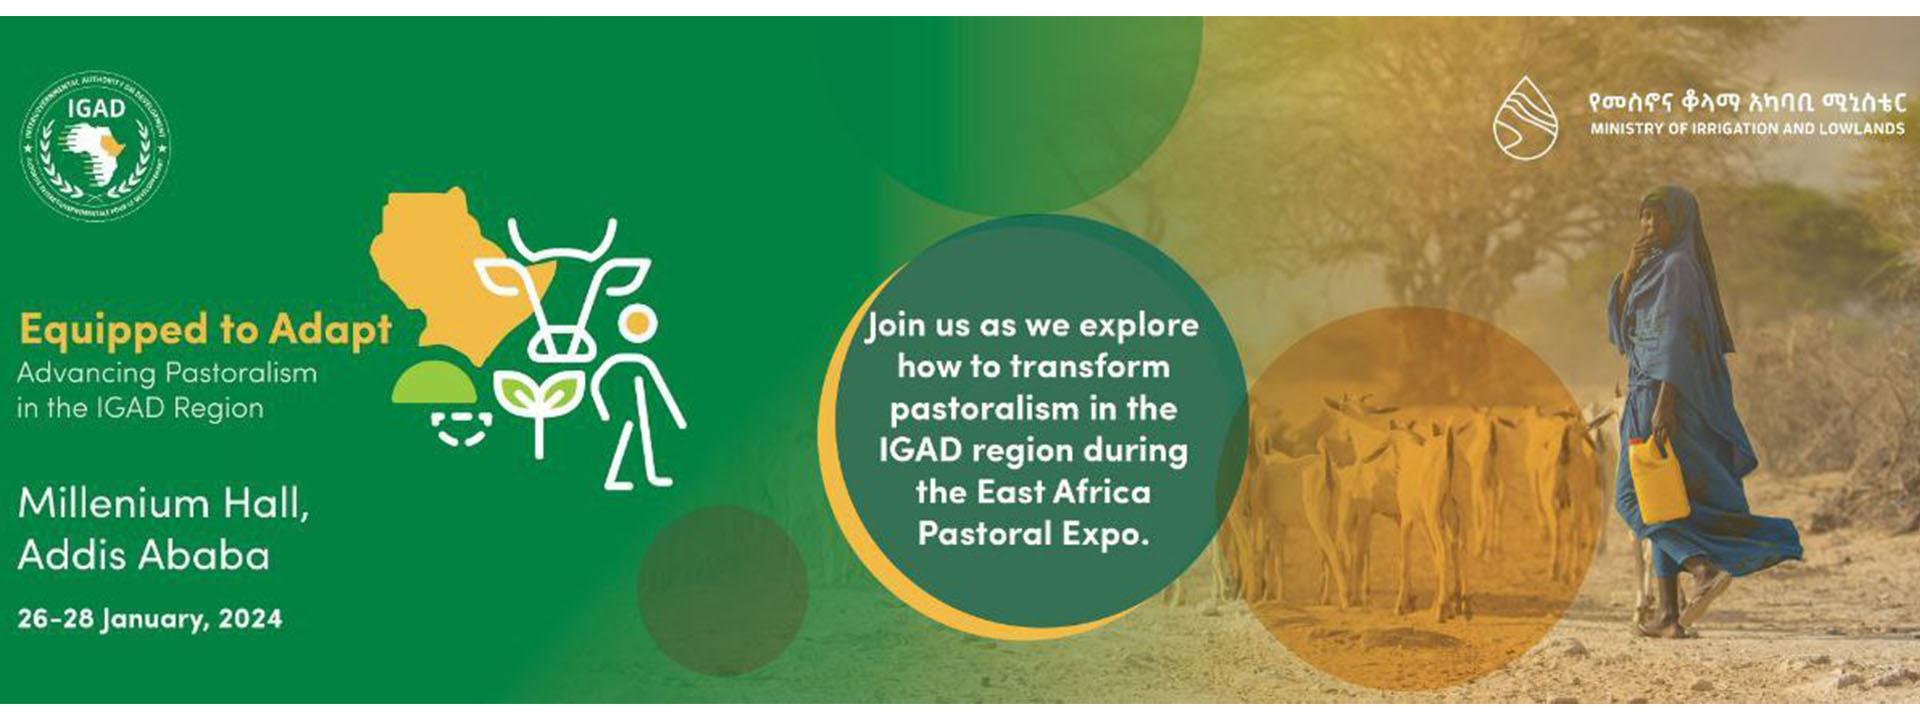 Empowering Pastoralism: Regional Pastoralism Day and Expo to Showcase Livelihood Resilience and Sustainable Development